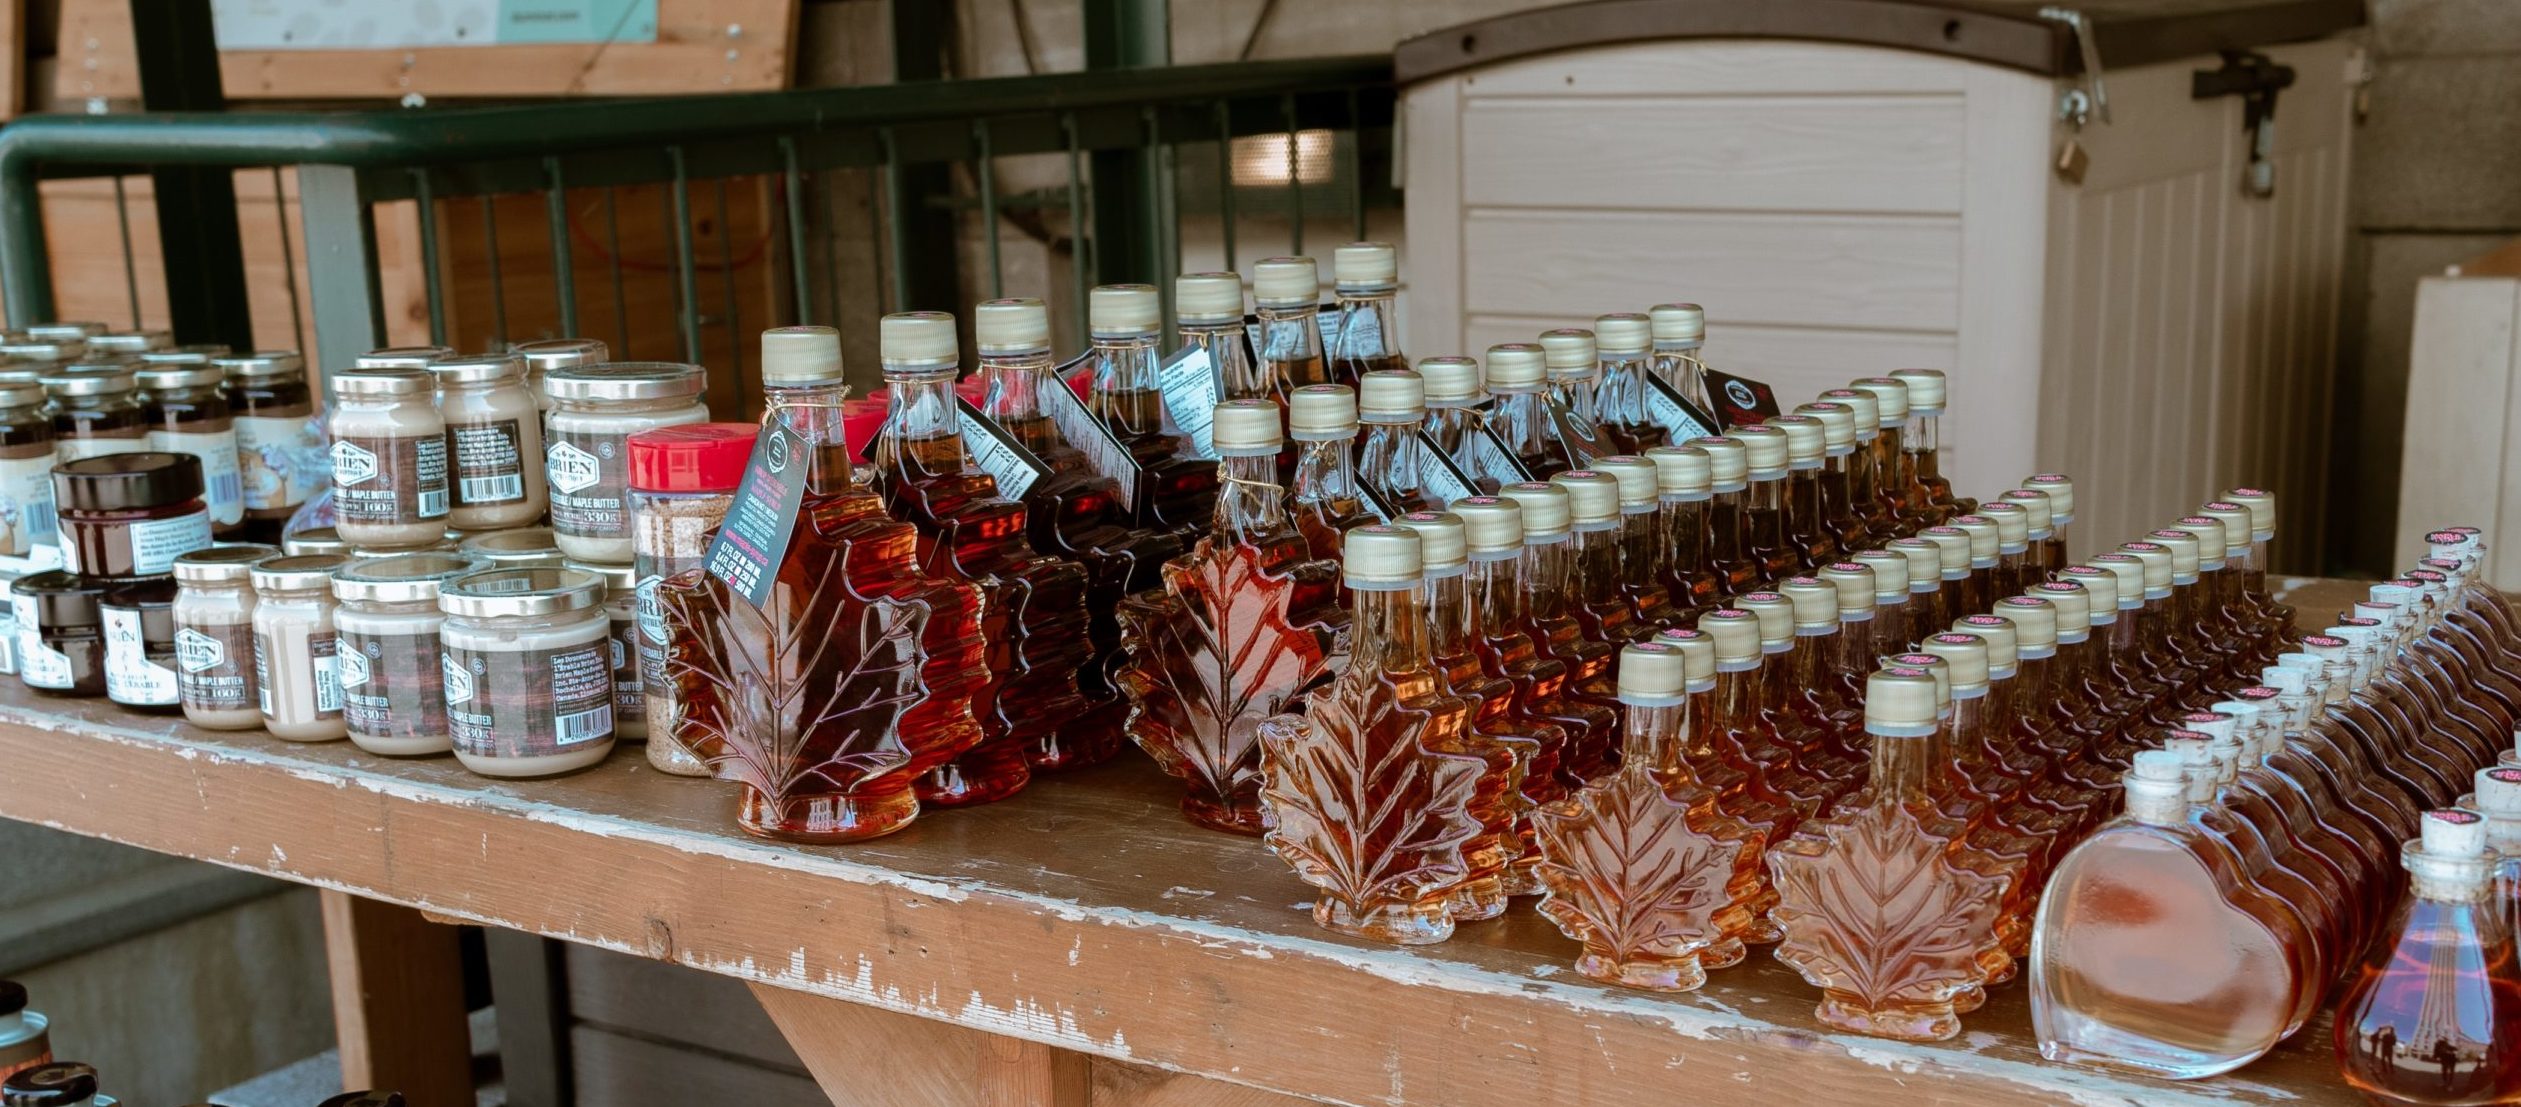 West Virginia Maple Syrup Festival ElkinsRandolph County Tourism